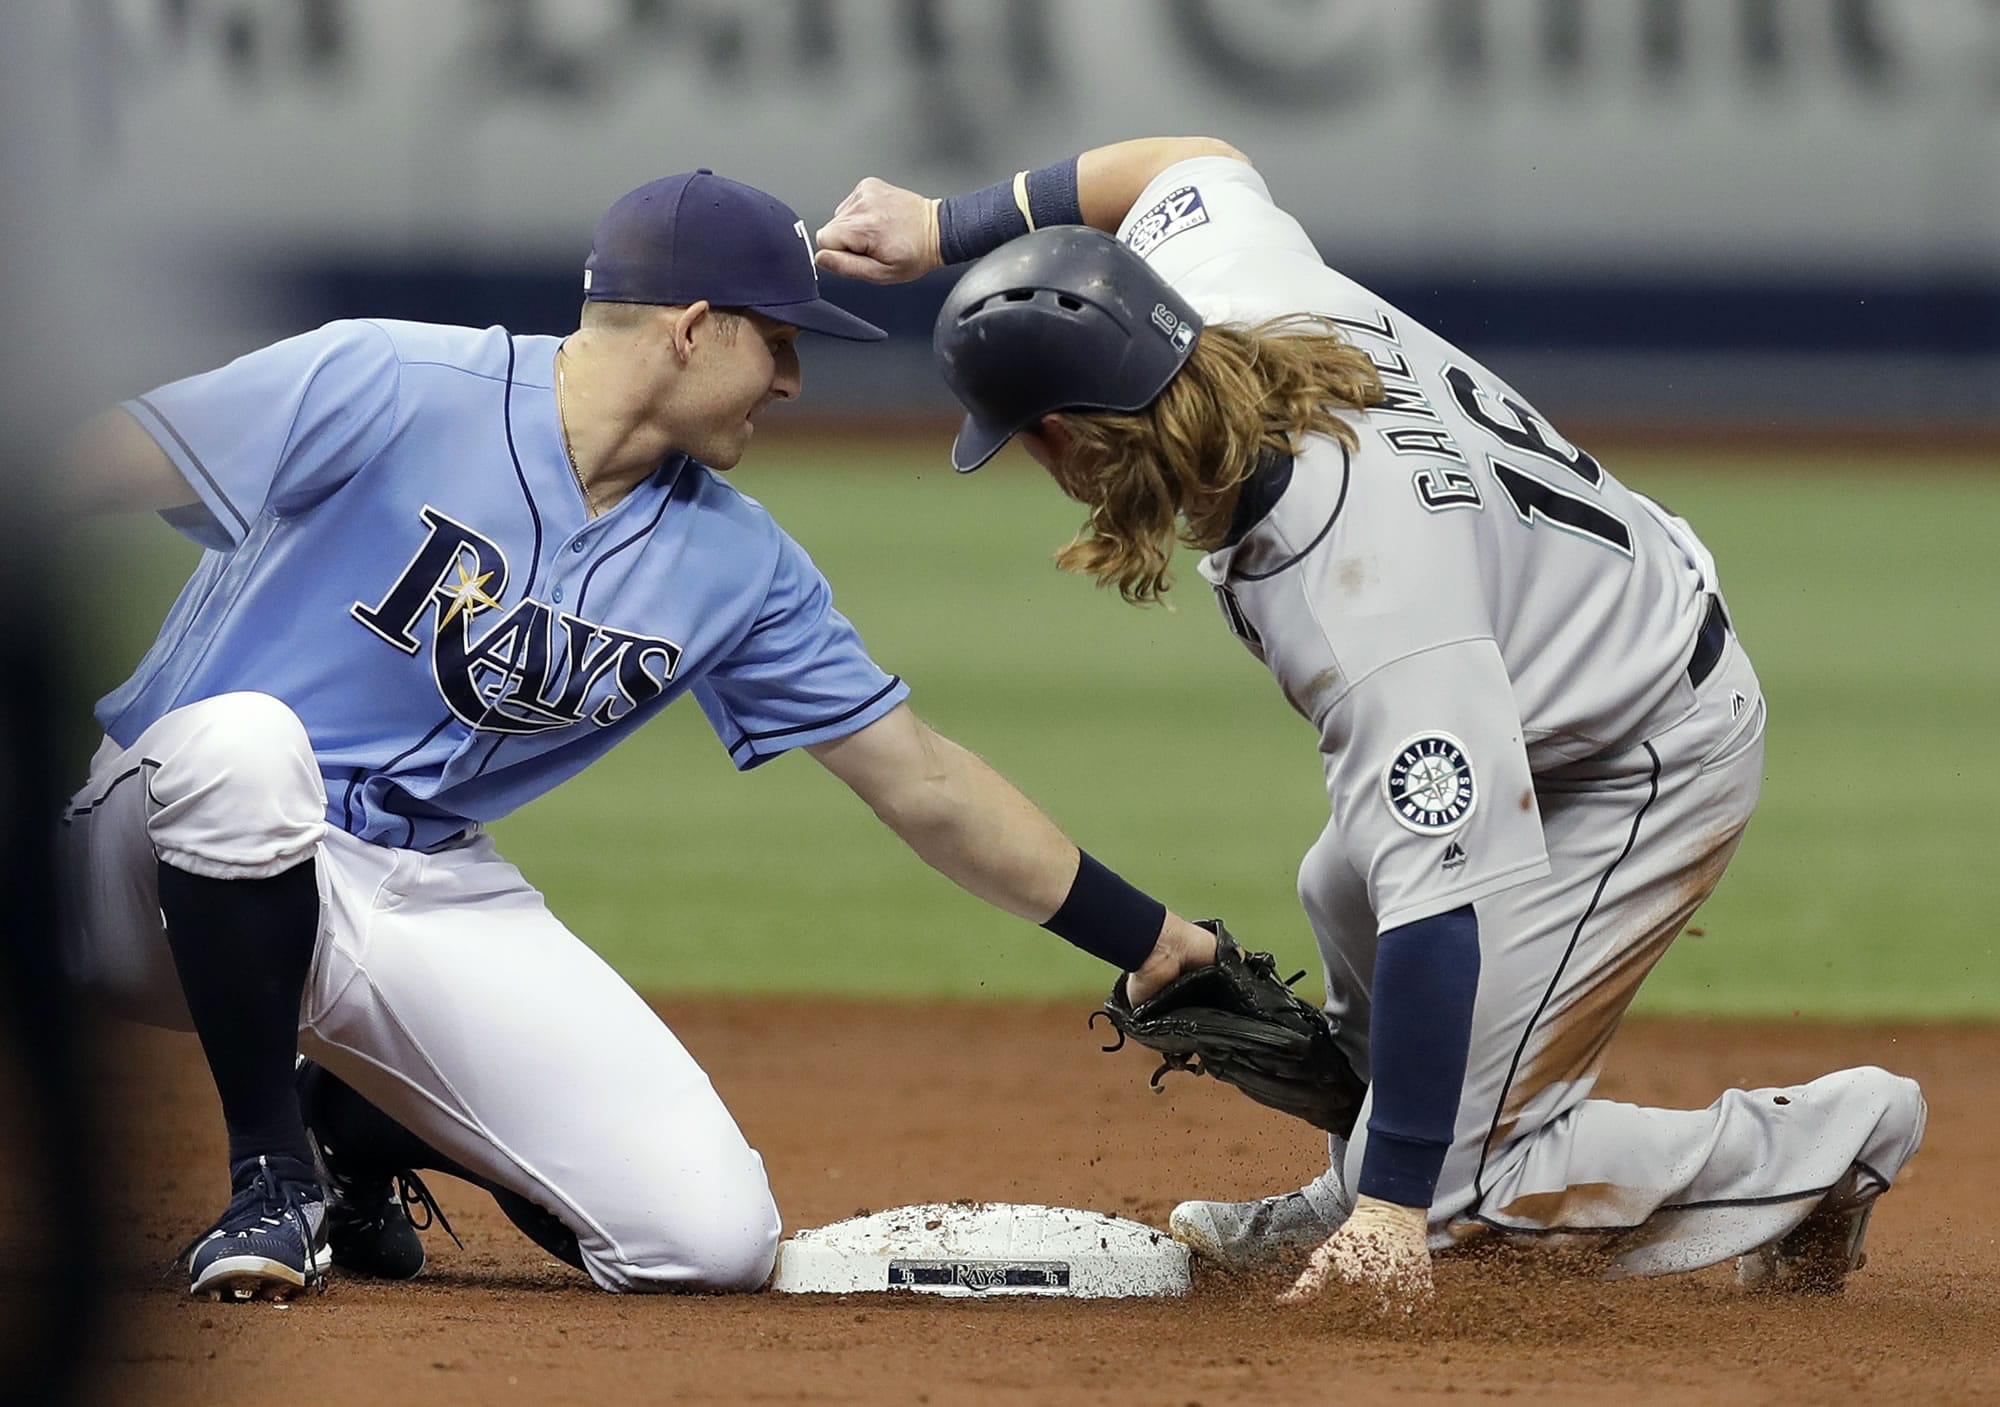 Tampa Bay Rays second baseman Brad Miller, left, tags out Seattle Mariners' Ben Gamel attempting to steal second base during the third inning of a baseball game, Sunday, Aug. 20, 2017, in St. Petersburg, Fla.